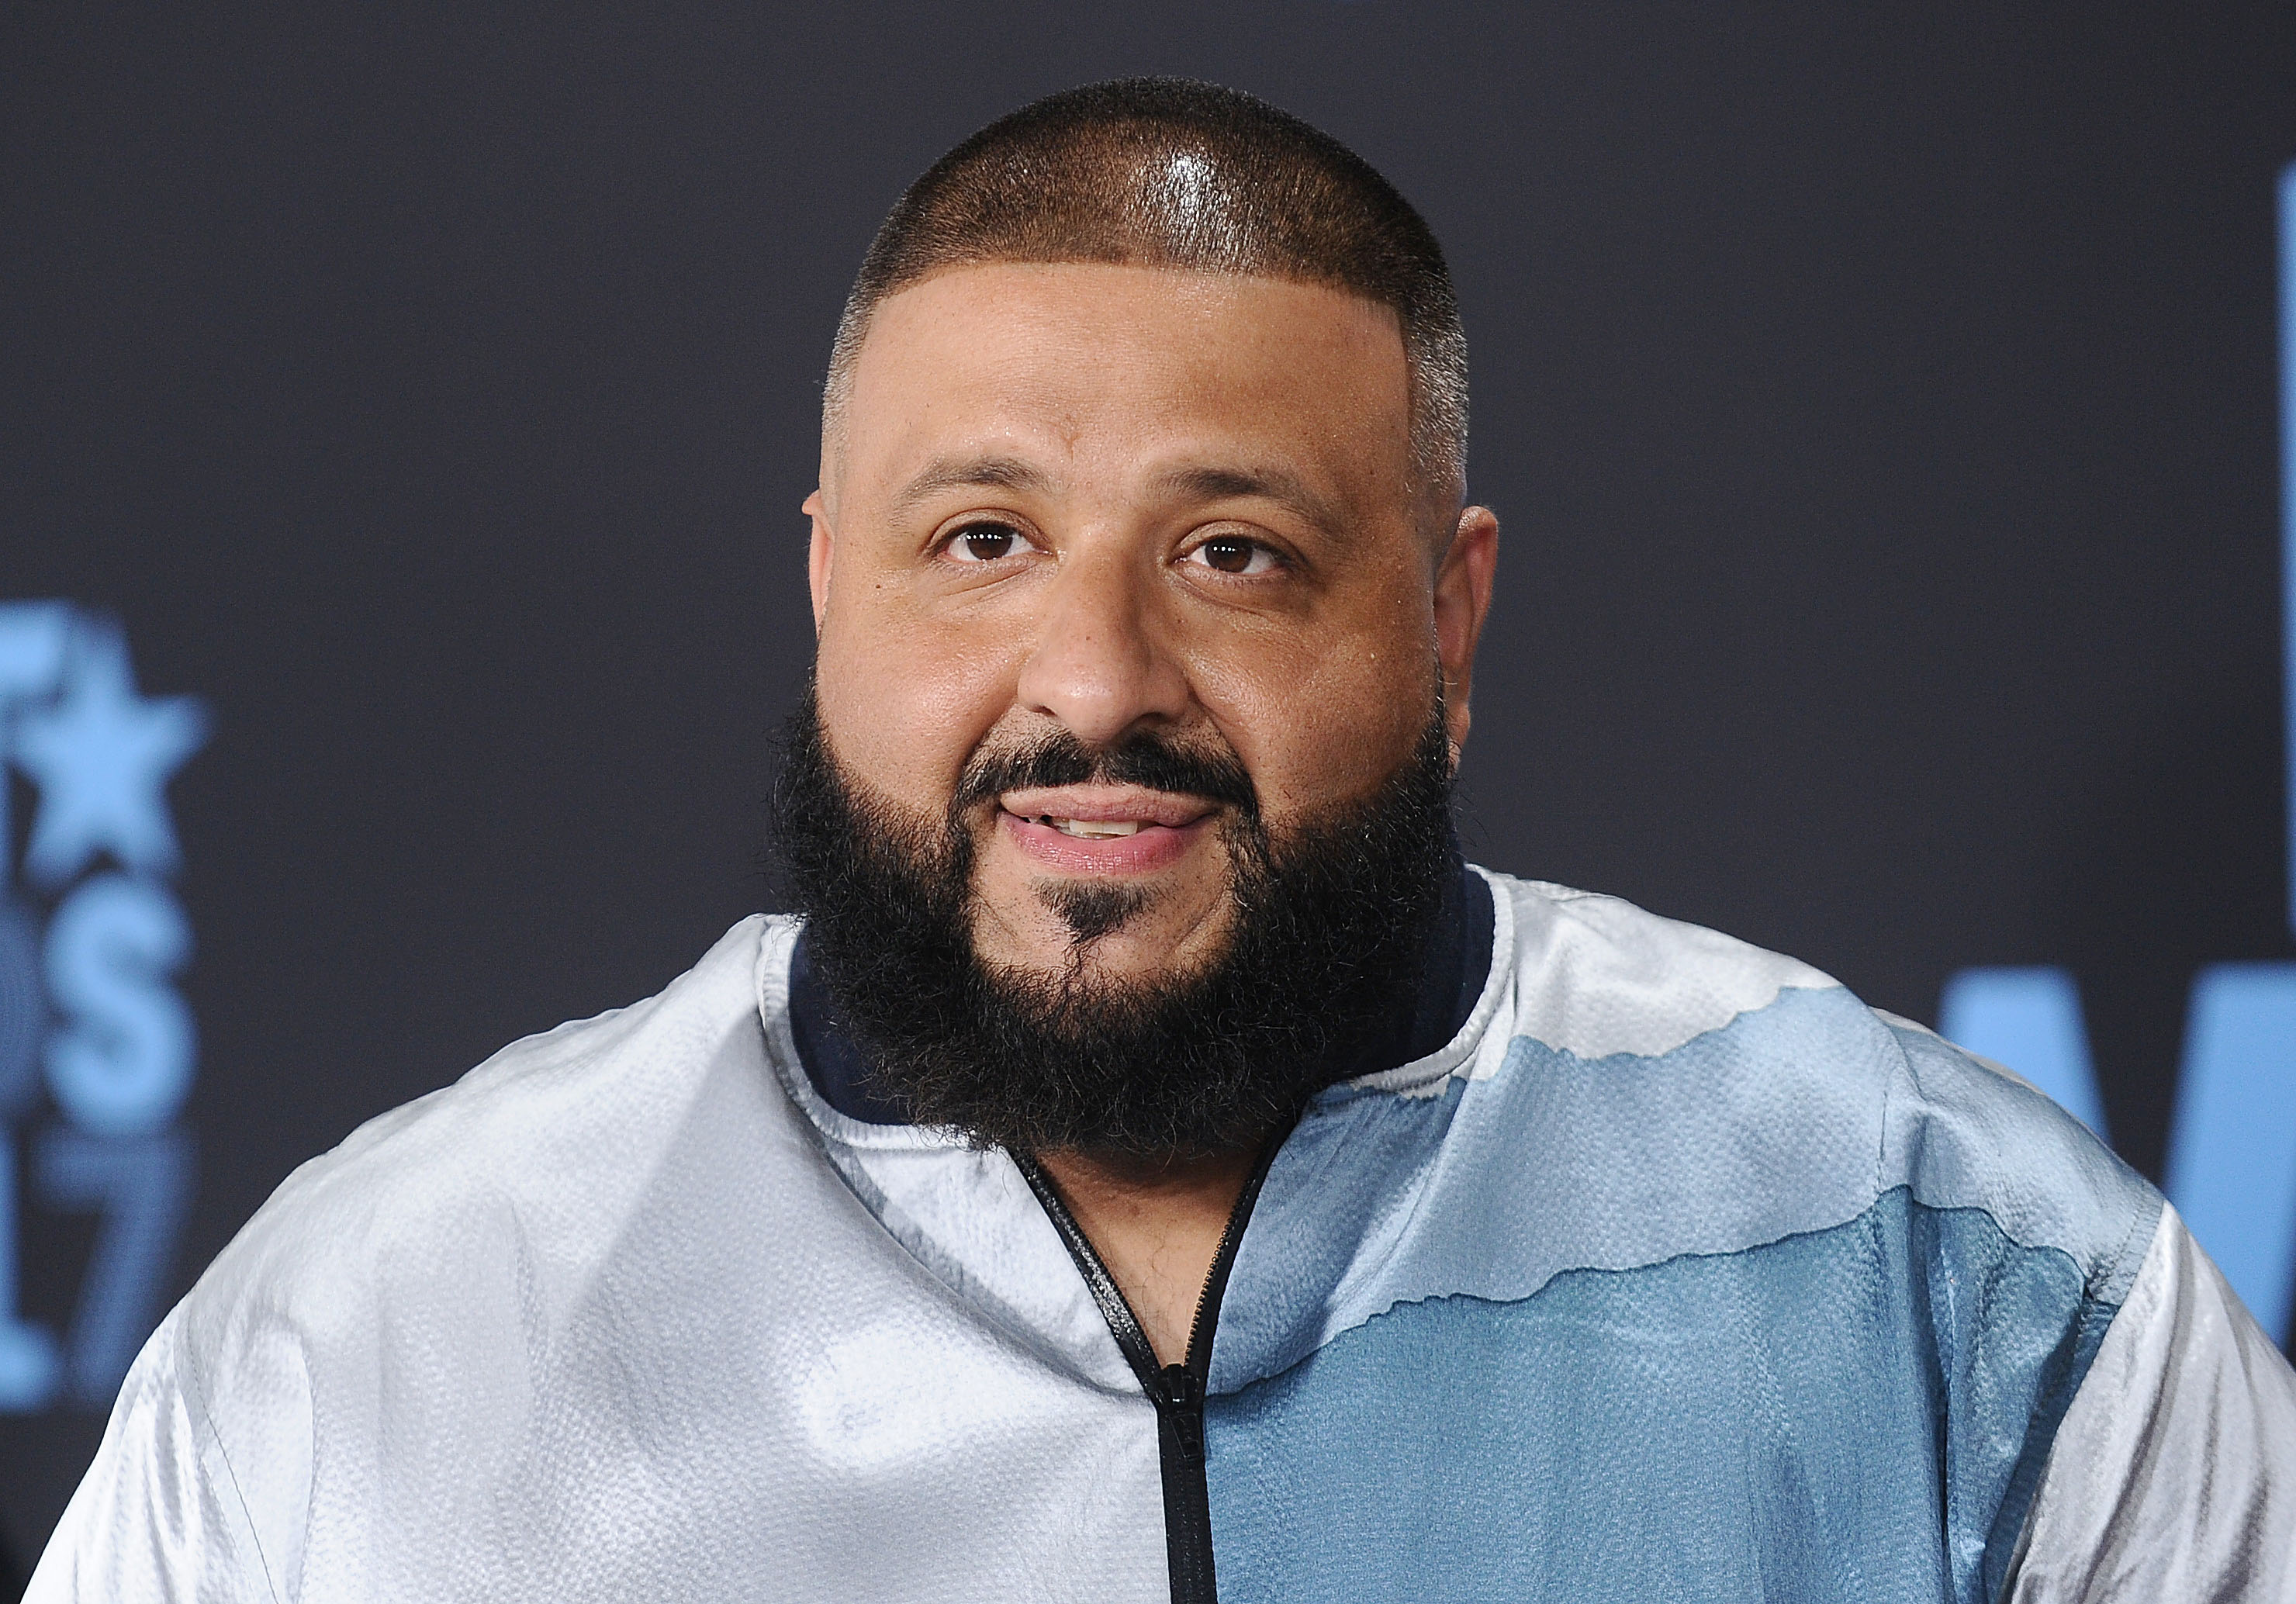 Khaled at the 2017 BET Awards at Microsoft Theater on June 25, 2017 in Los Angeles, California.| Source: Getty Images